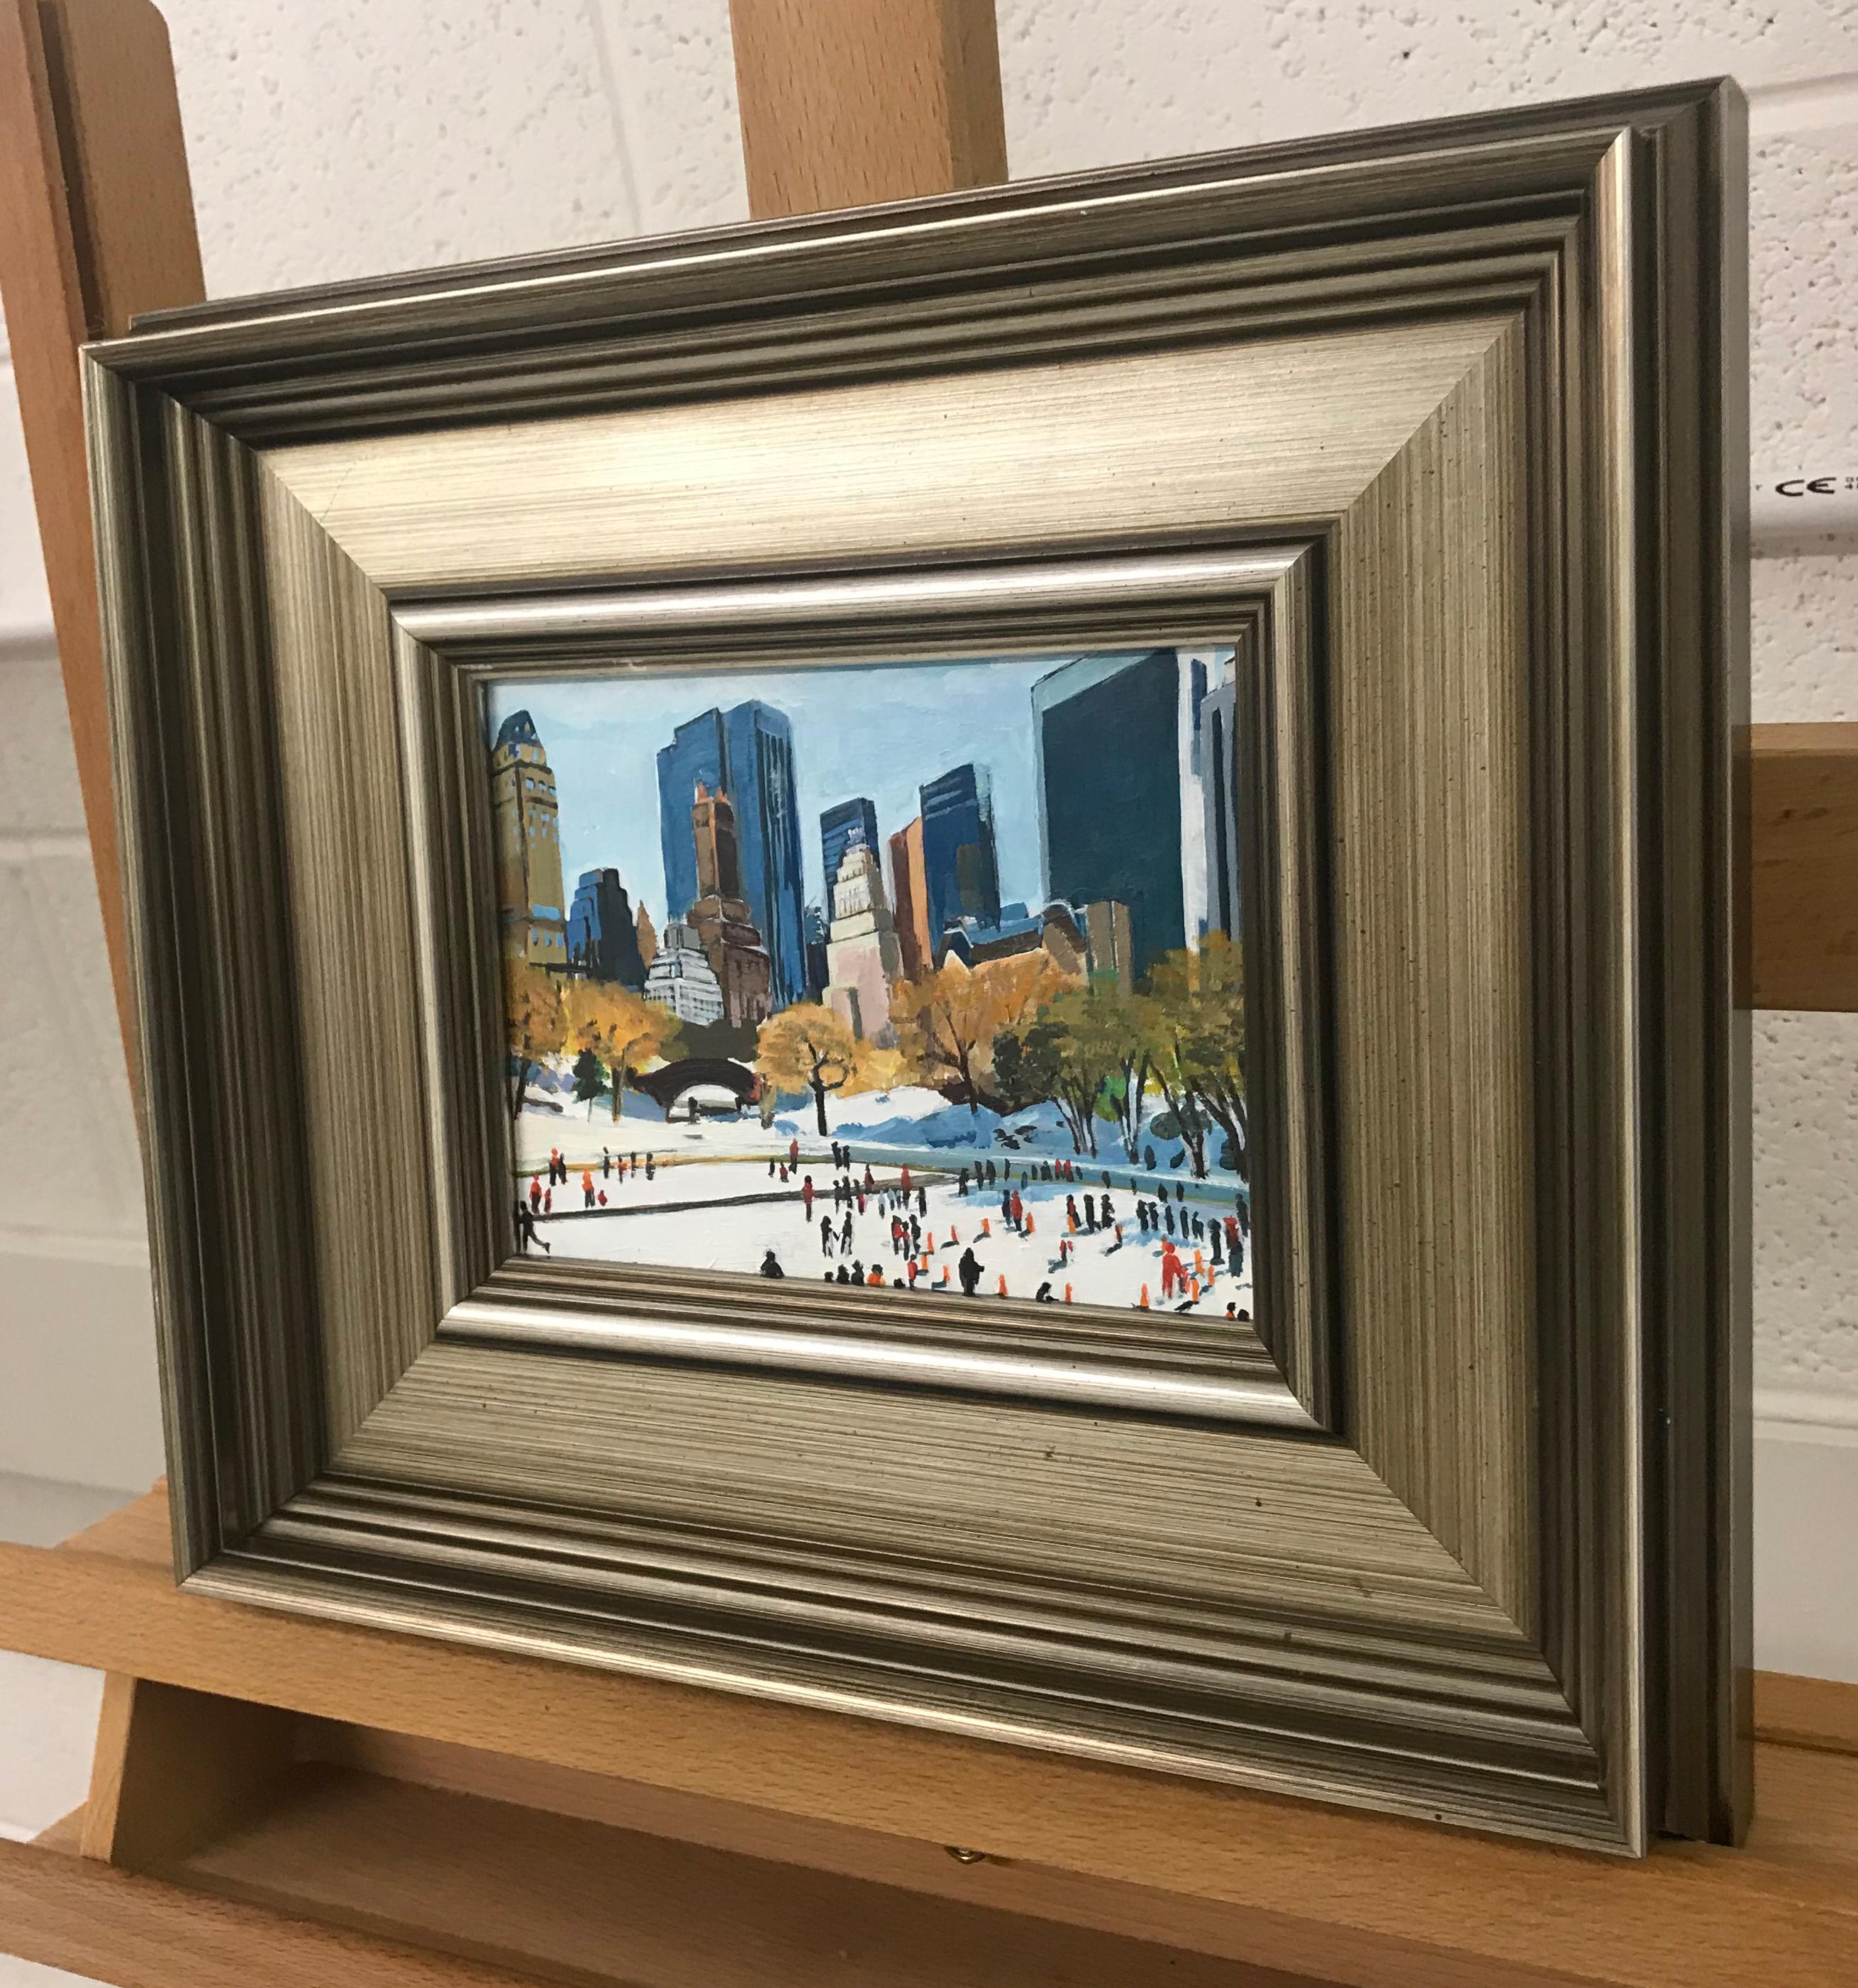 Small Study Painting of Skaters in Central Park, New York City. This is a rare miniature original from leading British Cityscape Artist, Angela Wakefield. Framed in a beautiful bronze moulding, the overall dimensions (including the frame) are